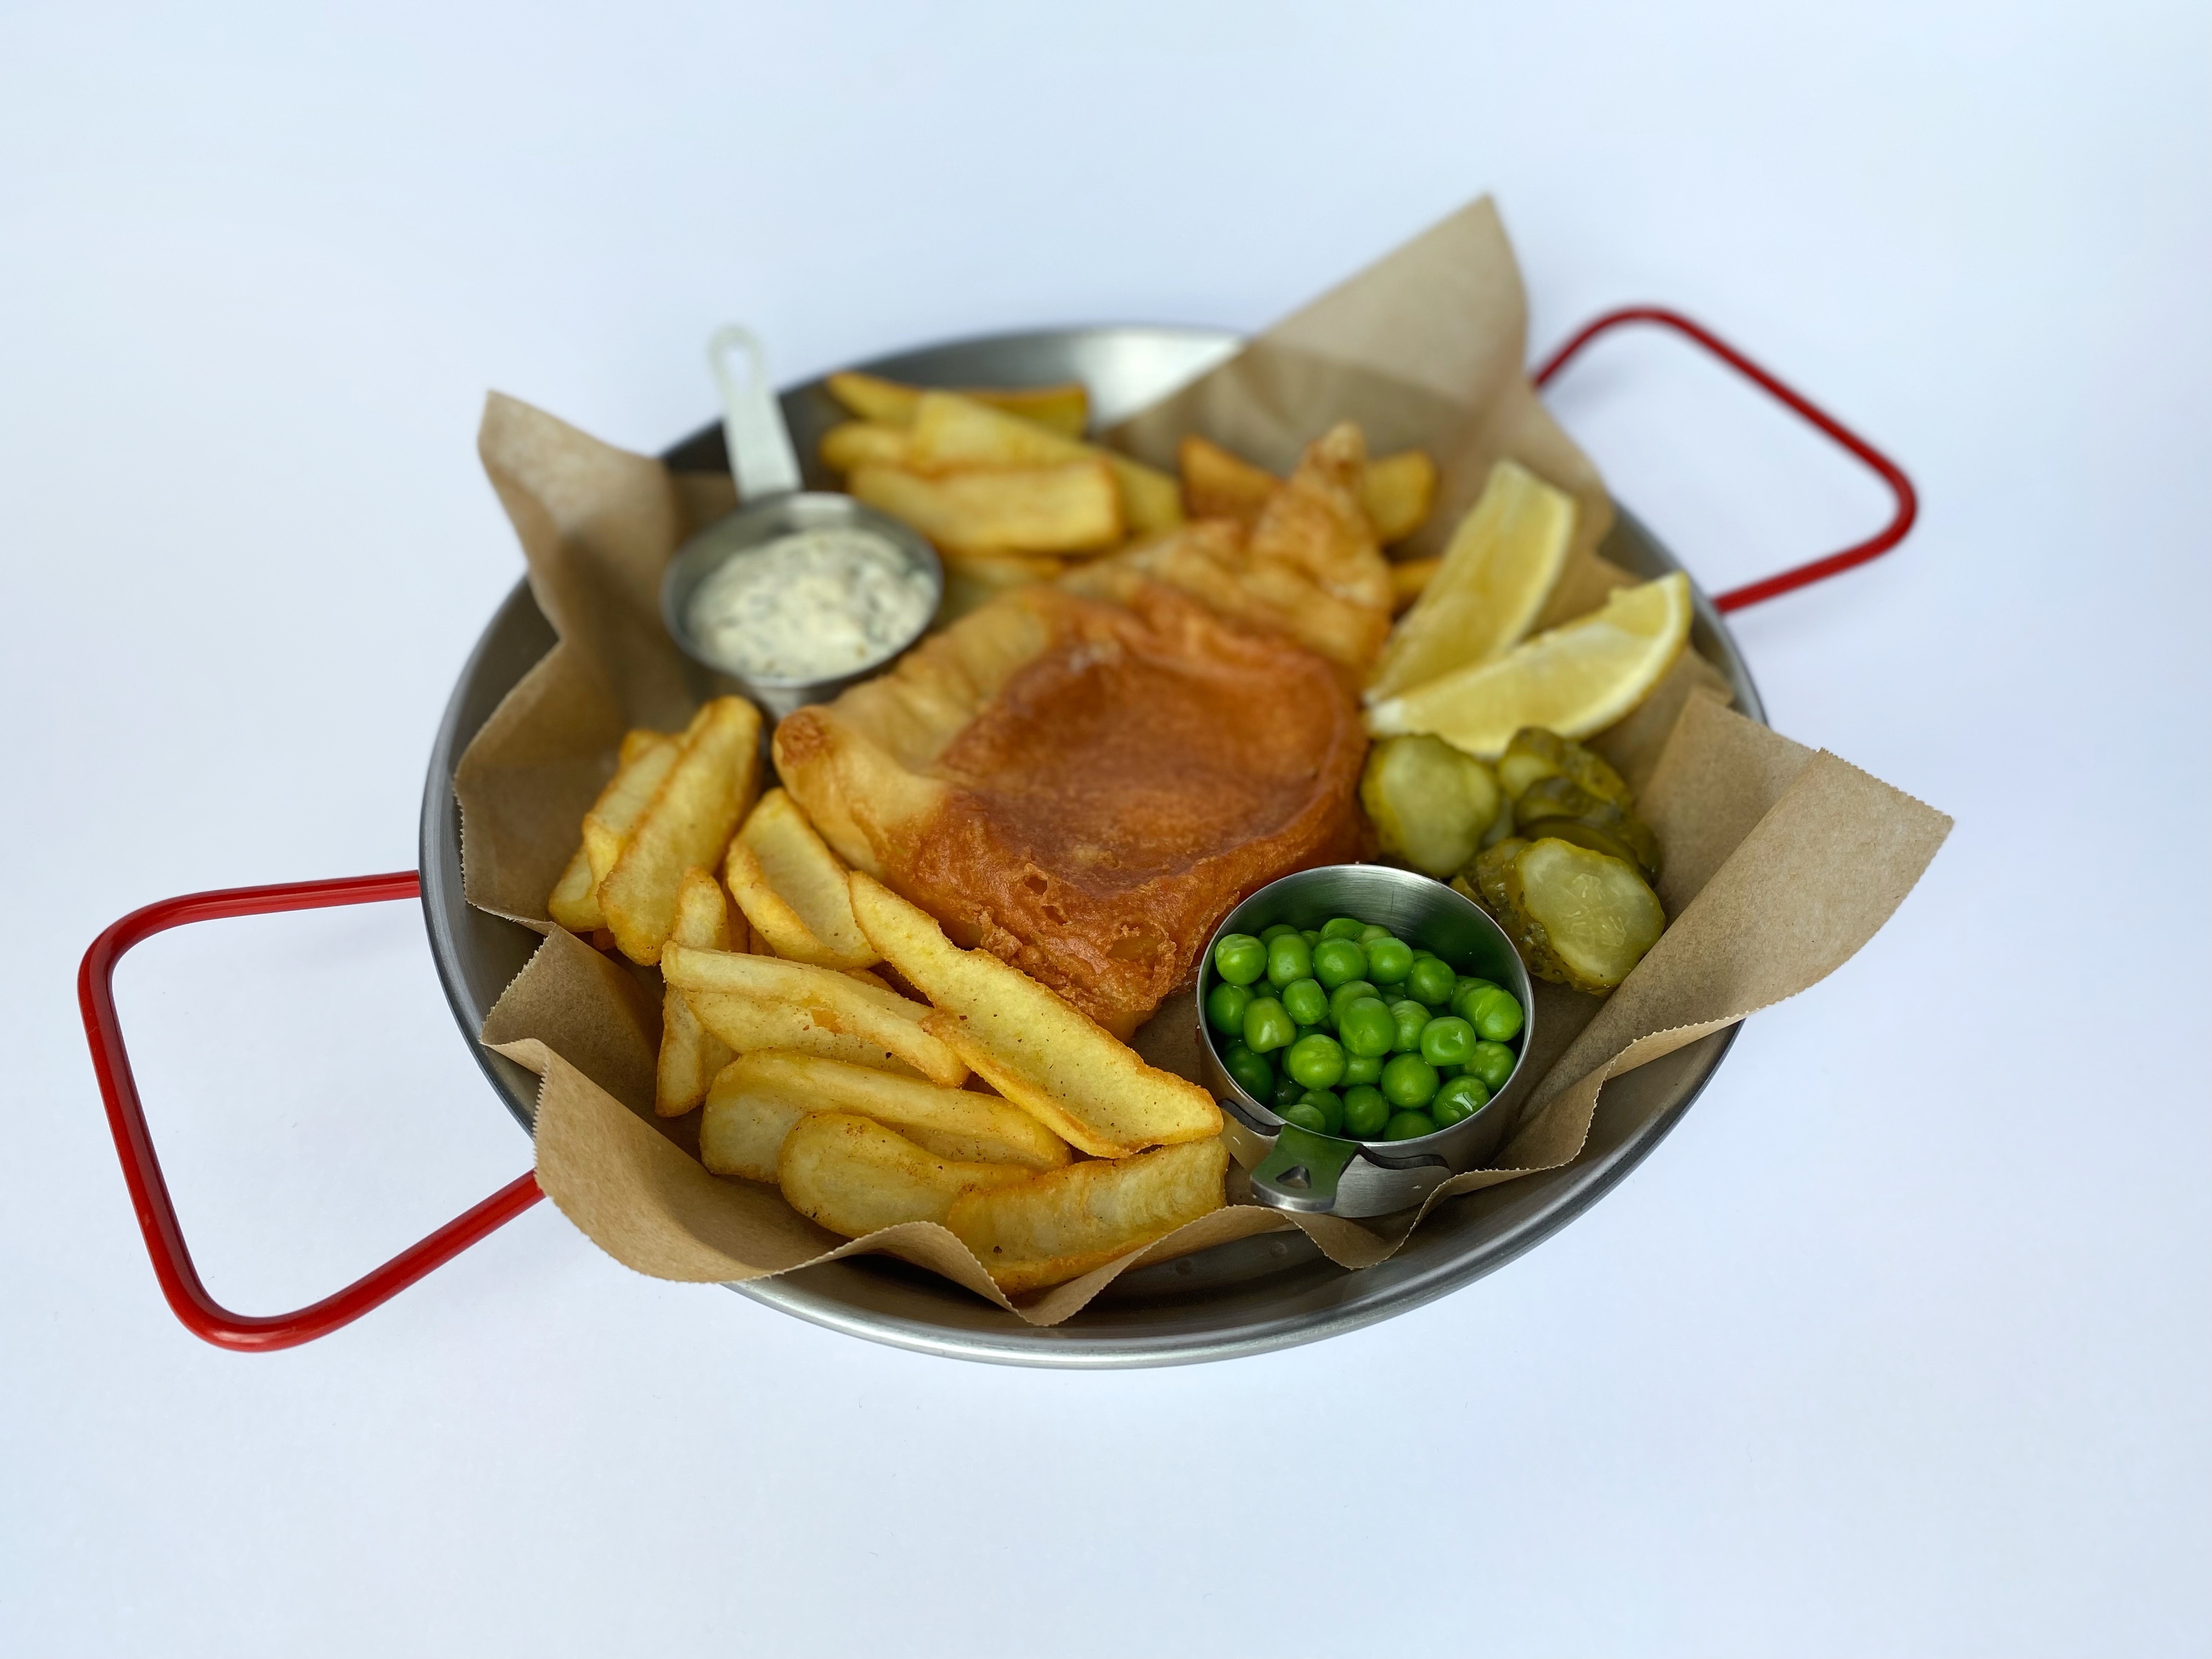 <span style="color: rgb(0, 0, 0);">Beer-battered cod Fish &amp; Chips with French fries and tartar sauce</span>